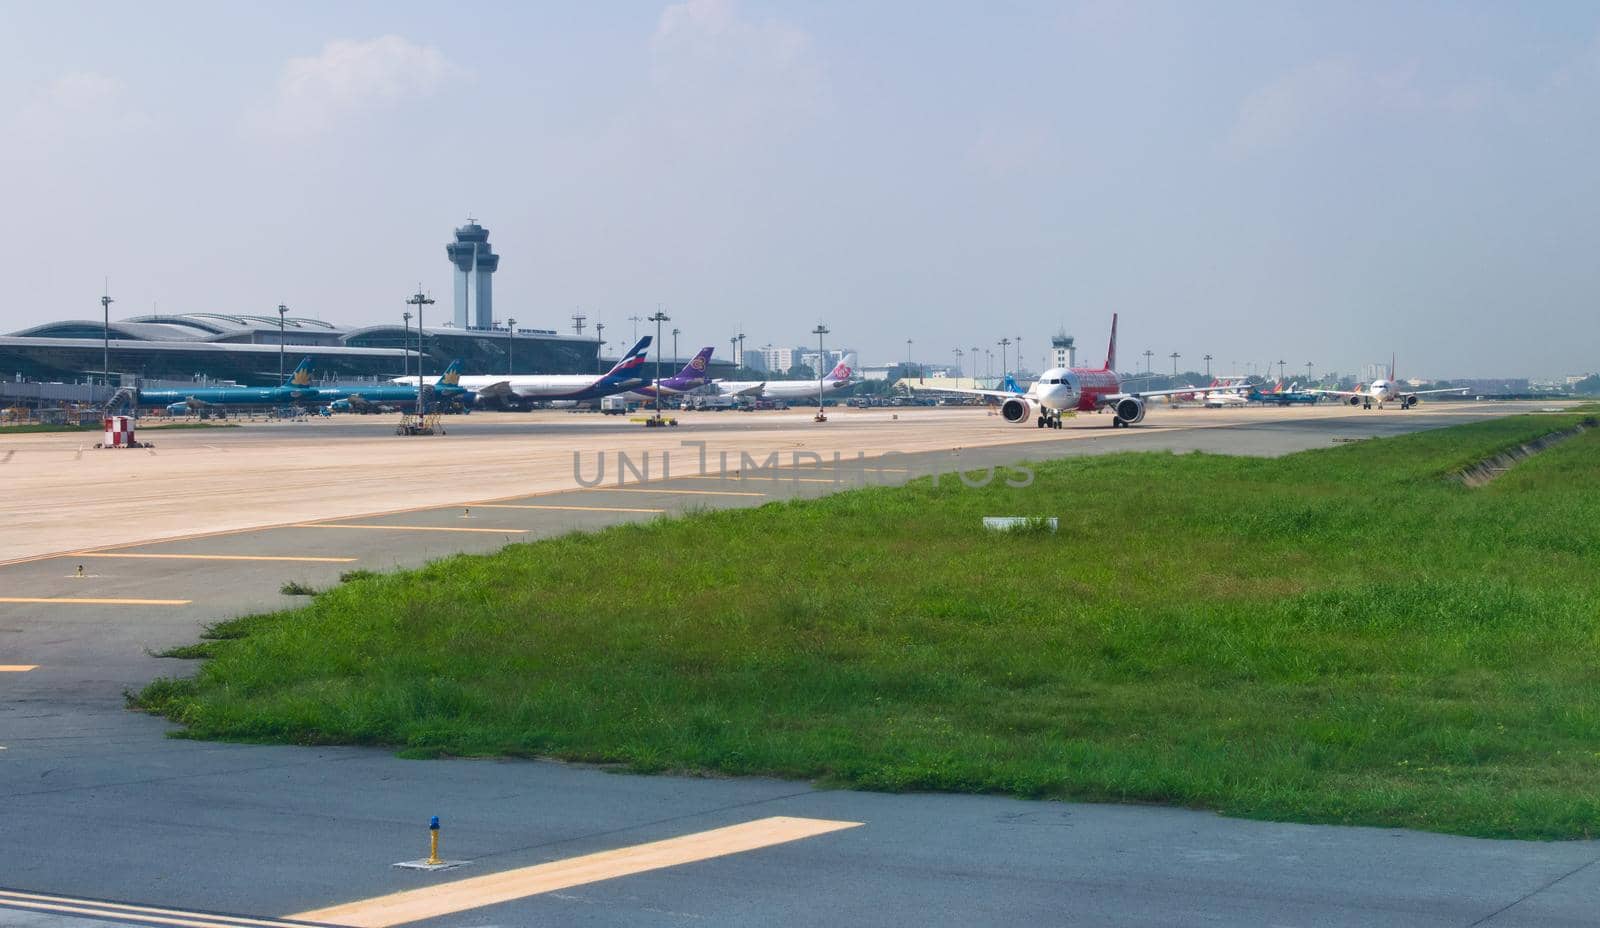 2019-11-14 / Ho Chi Minh City, Vietnam - Airliners queue up in the taxiway of the airport, awaiting authorization to take off. by hernan_hyper